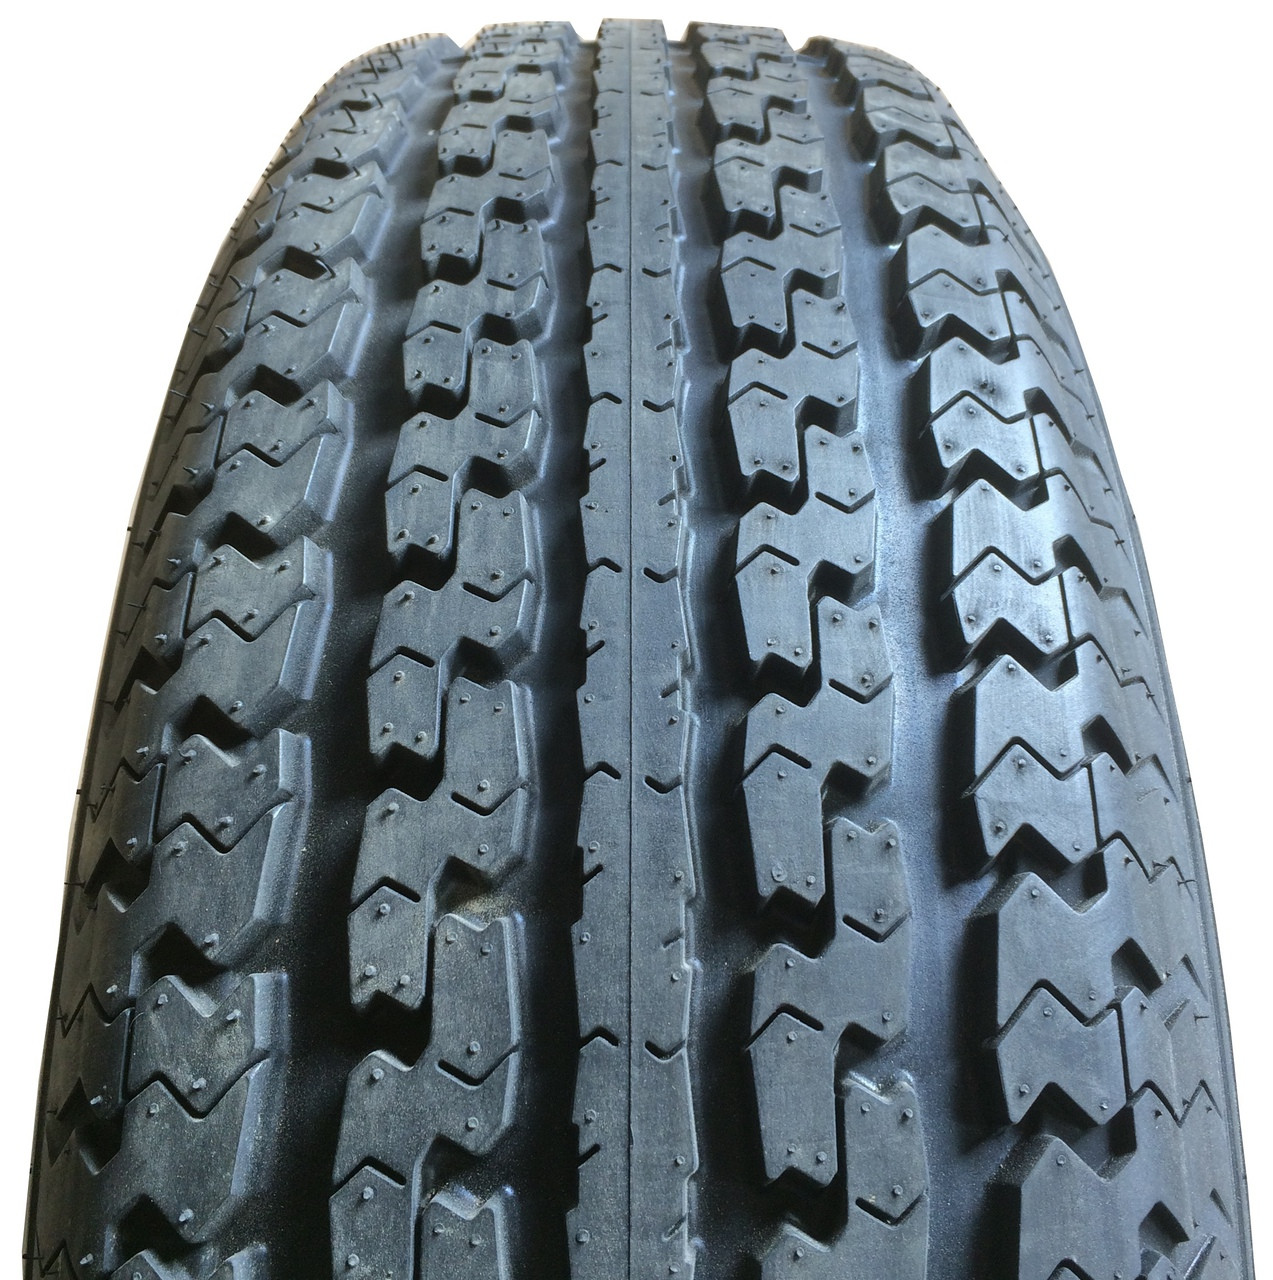 New Tire 225 75 15 Loadmaxx St 10 Ply Radial Marathon St225 75r15 Boat Trailer Your Next Tire